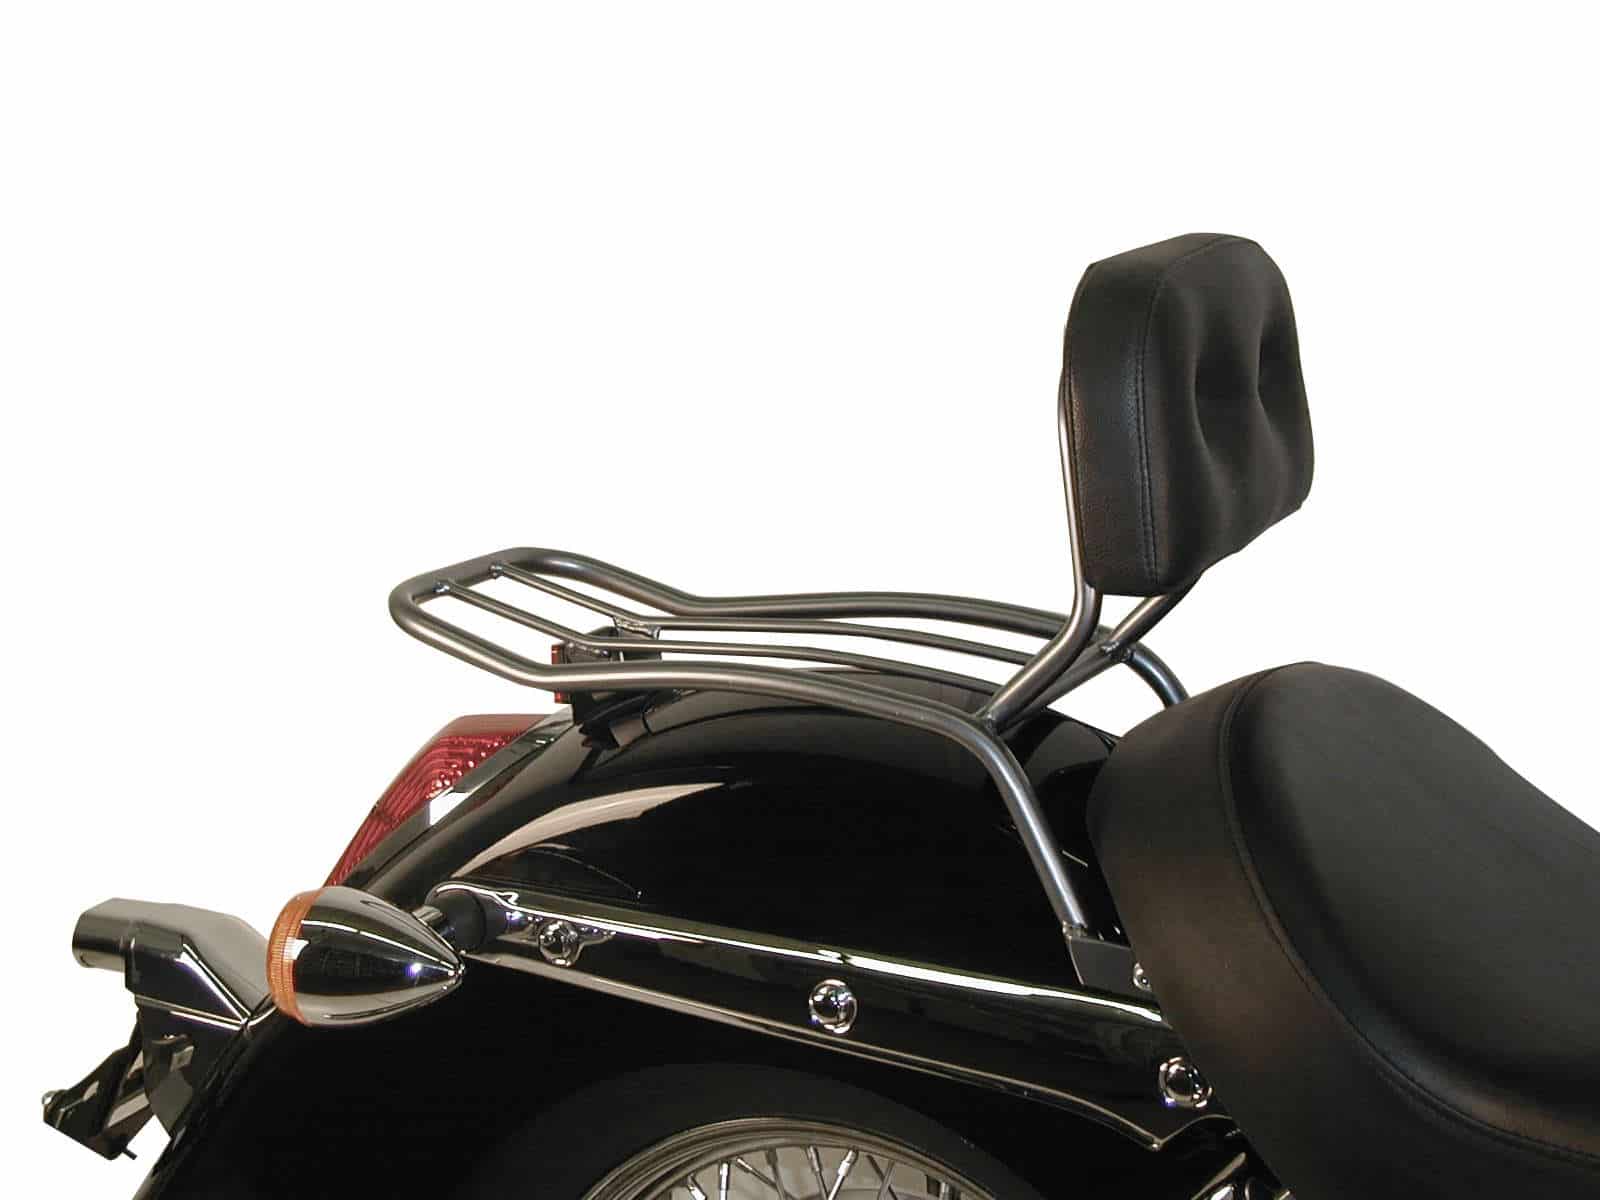 Solorack with backrest for Honda VT 750 Shadow (2004 -2007)